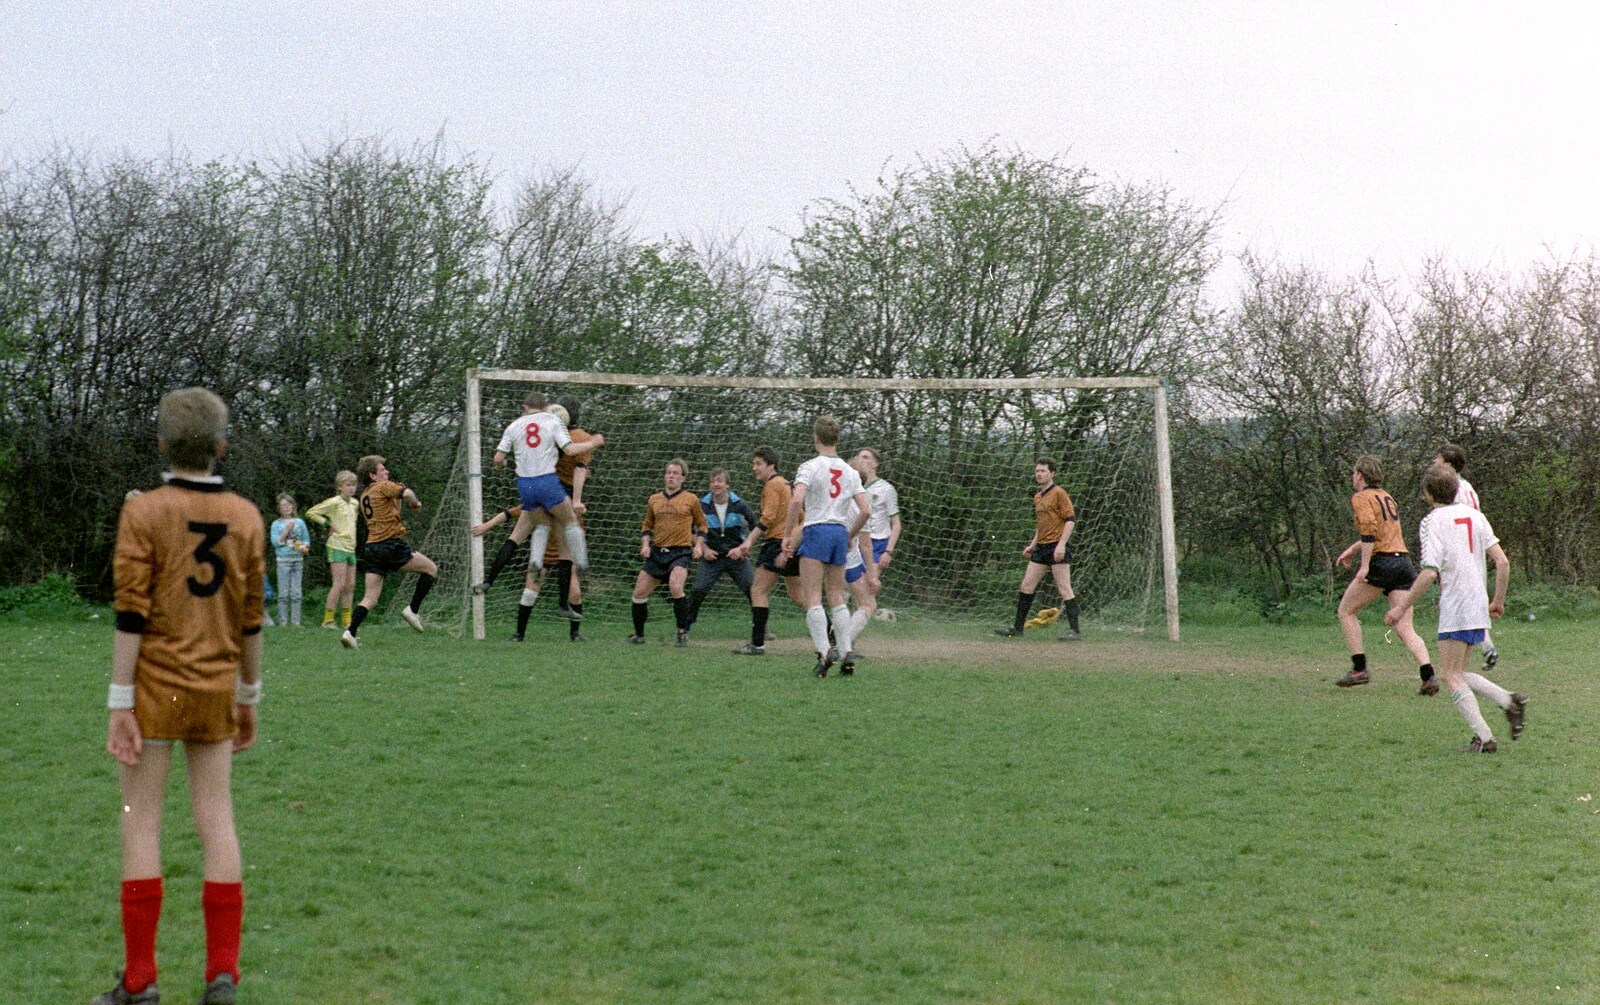 Kevin Molloy defends the Soman's goal from Soman-Wherry Footie Action, Norfolk - 25th February 1988